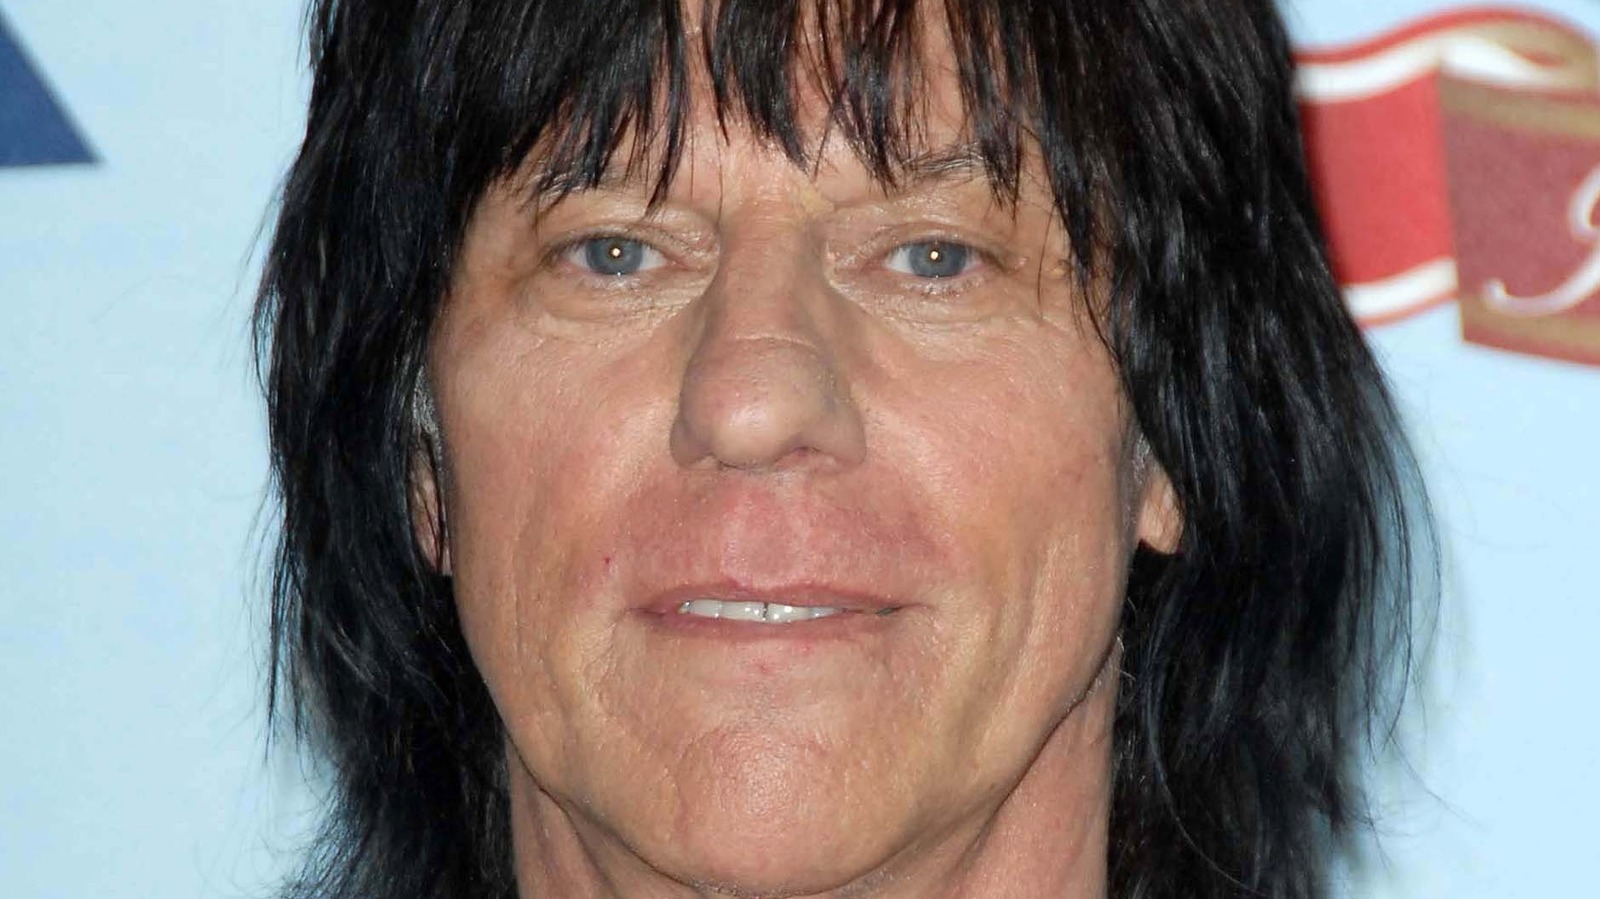 What The Last 12 Months Of Jeff Beck’s Life Were Like – Grunge